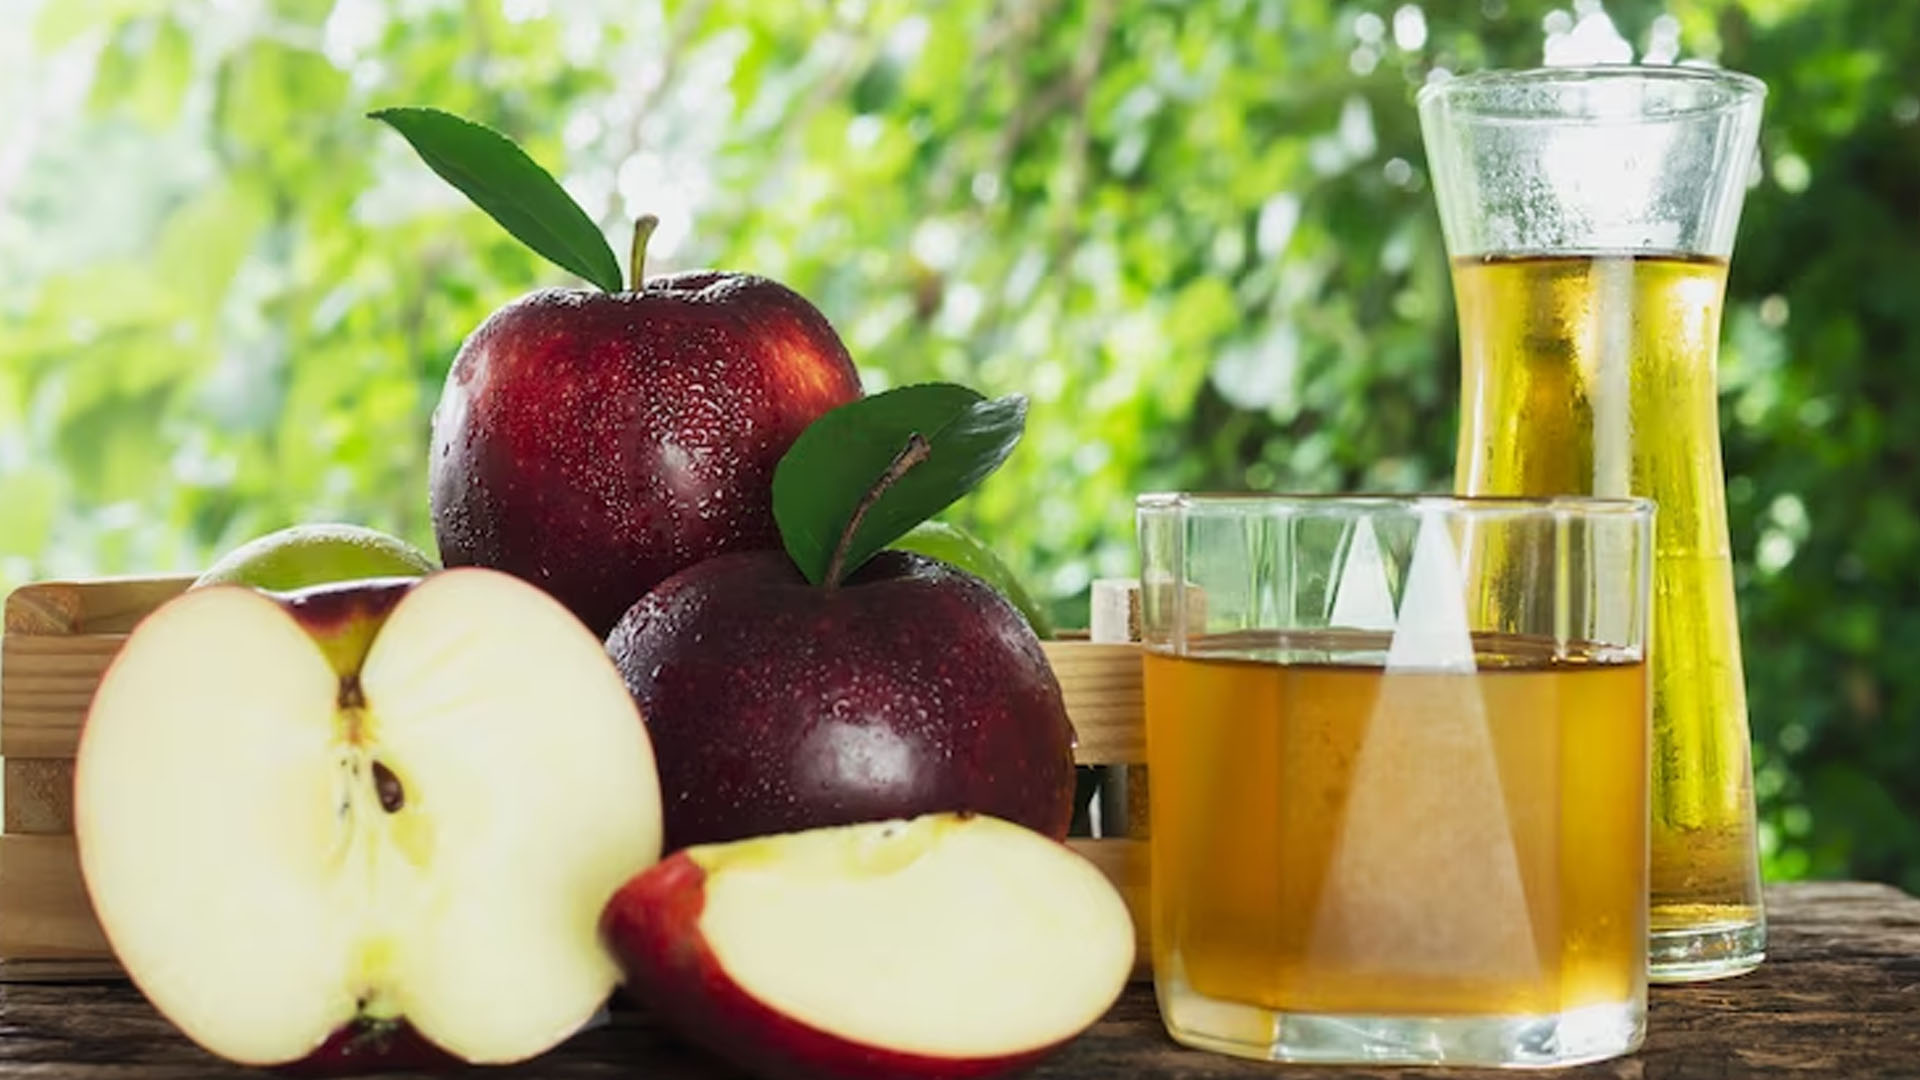 How To Take Cider Vinegar & Its Health Benefits?